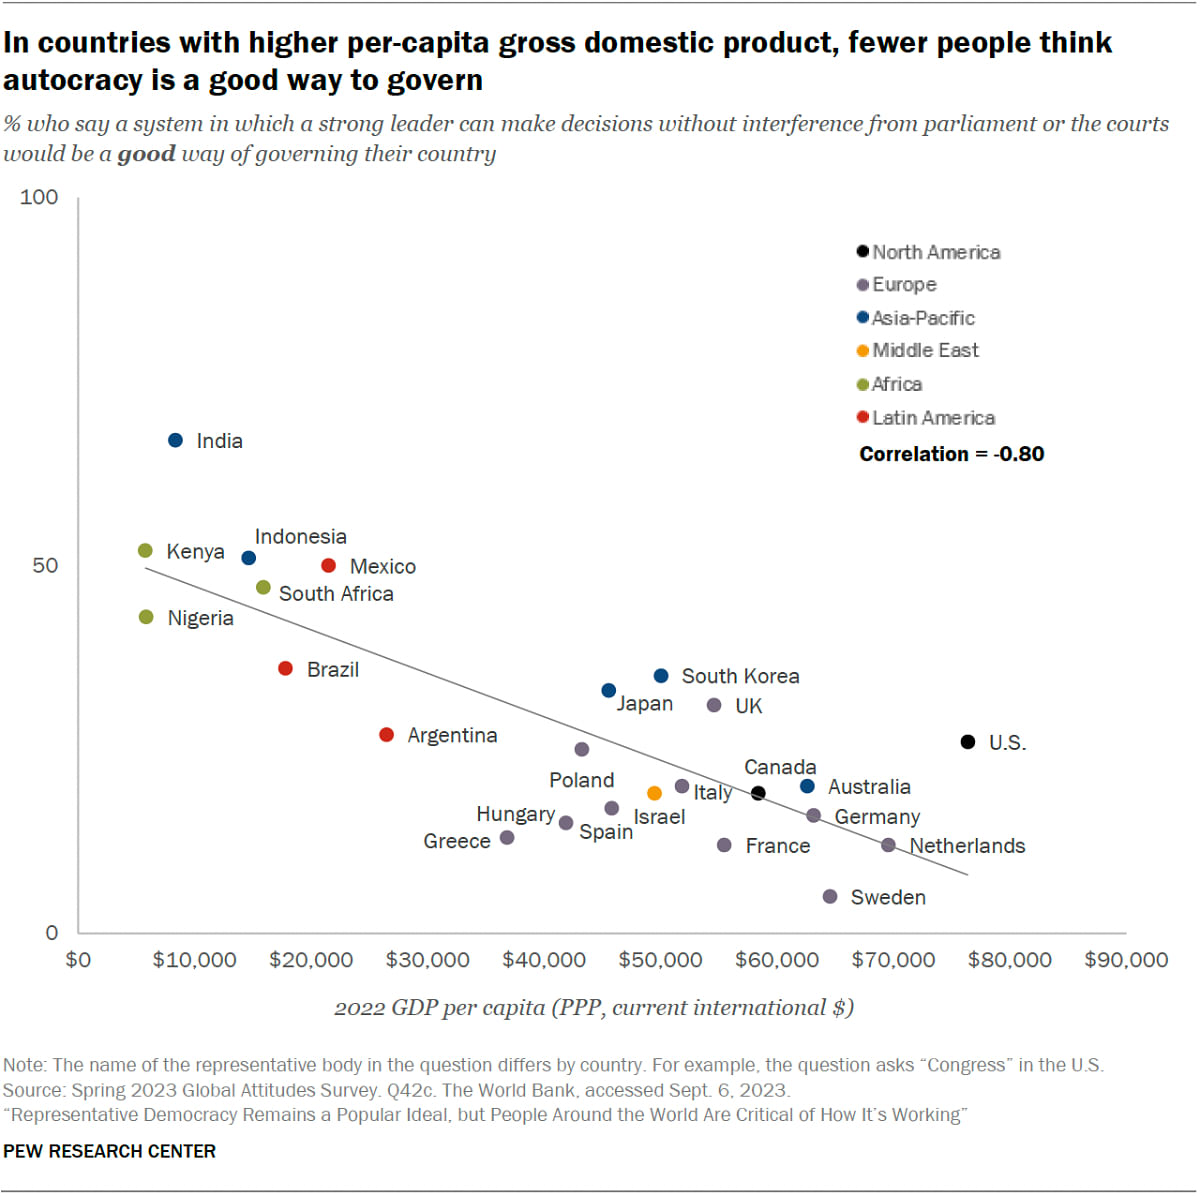 There exists a correlation between per capita GDP and support for autocracy.